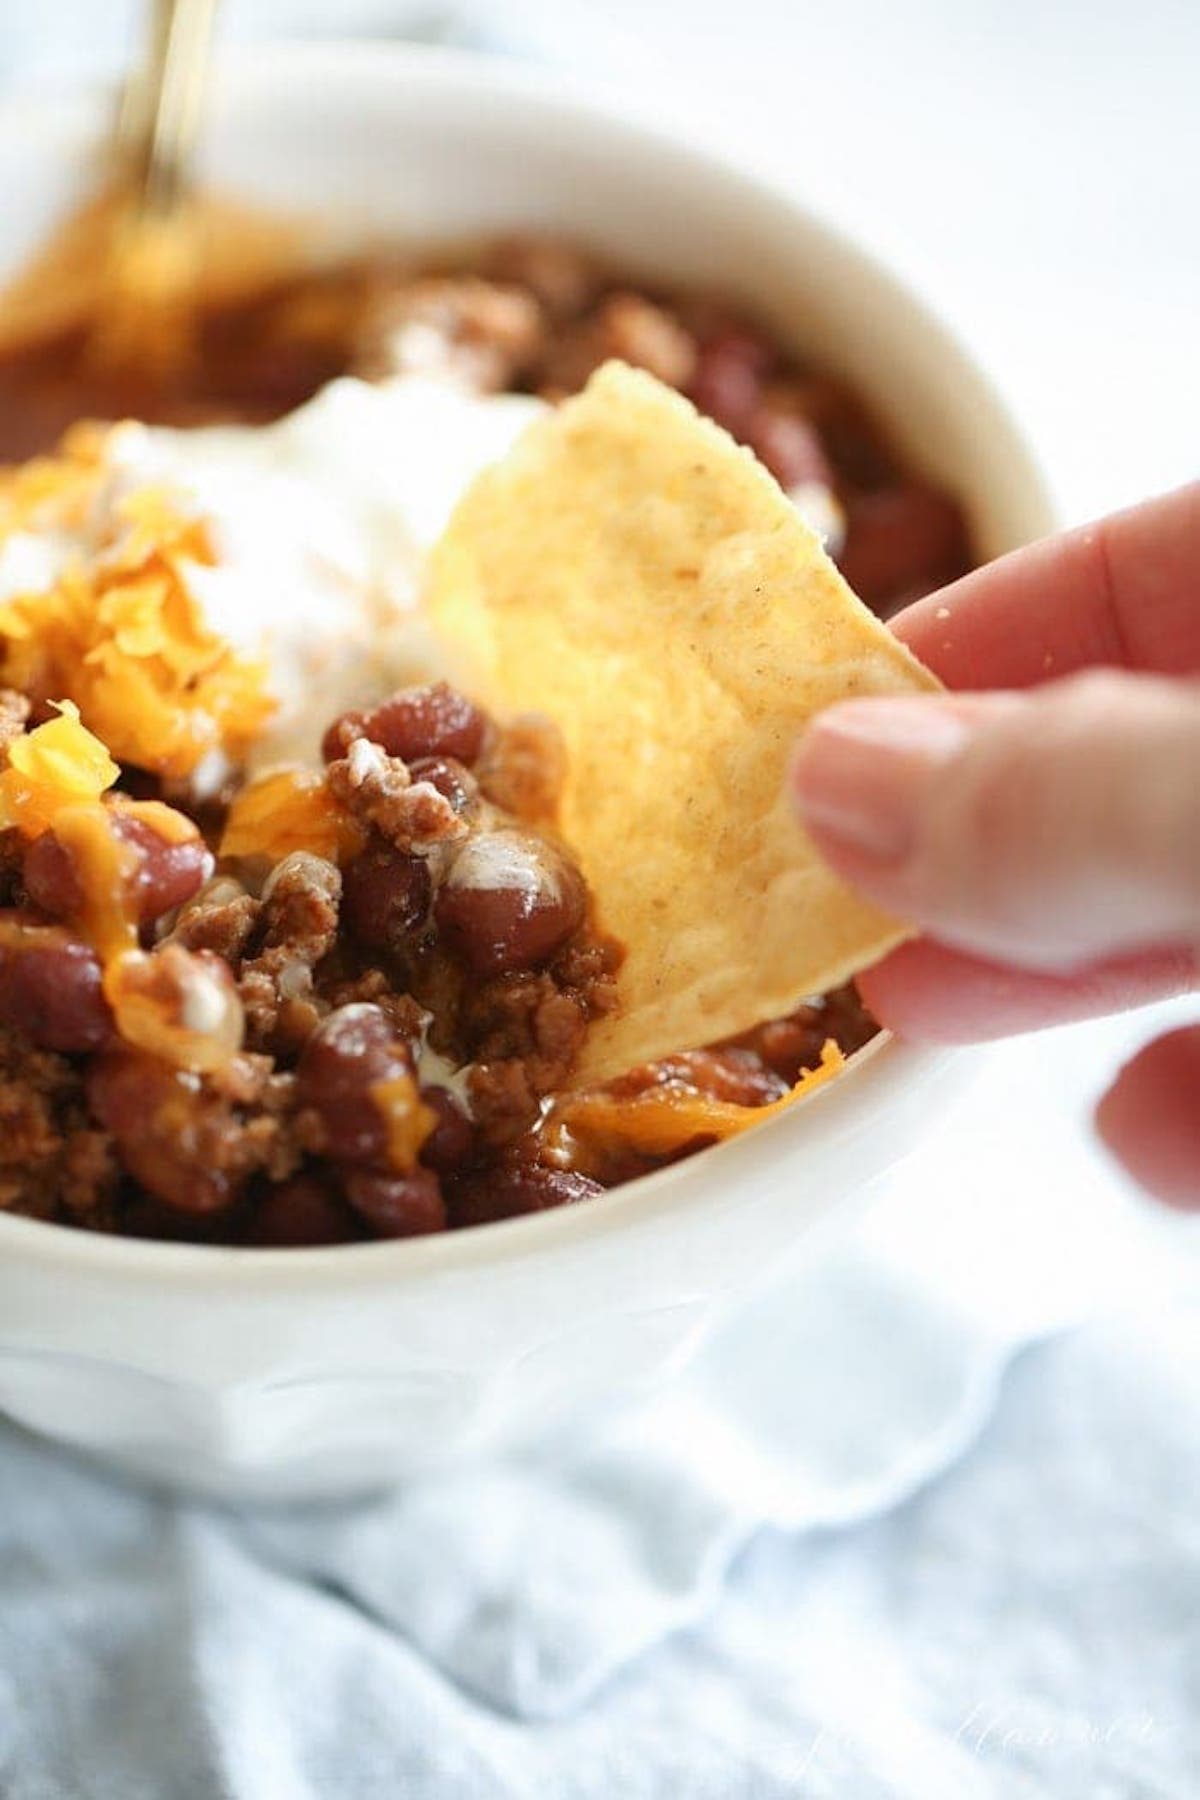 A person quickly dipping an easy tortilla into a bowl of chili.